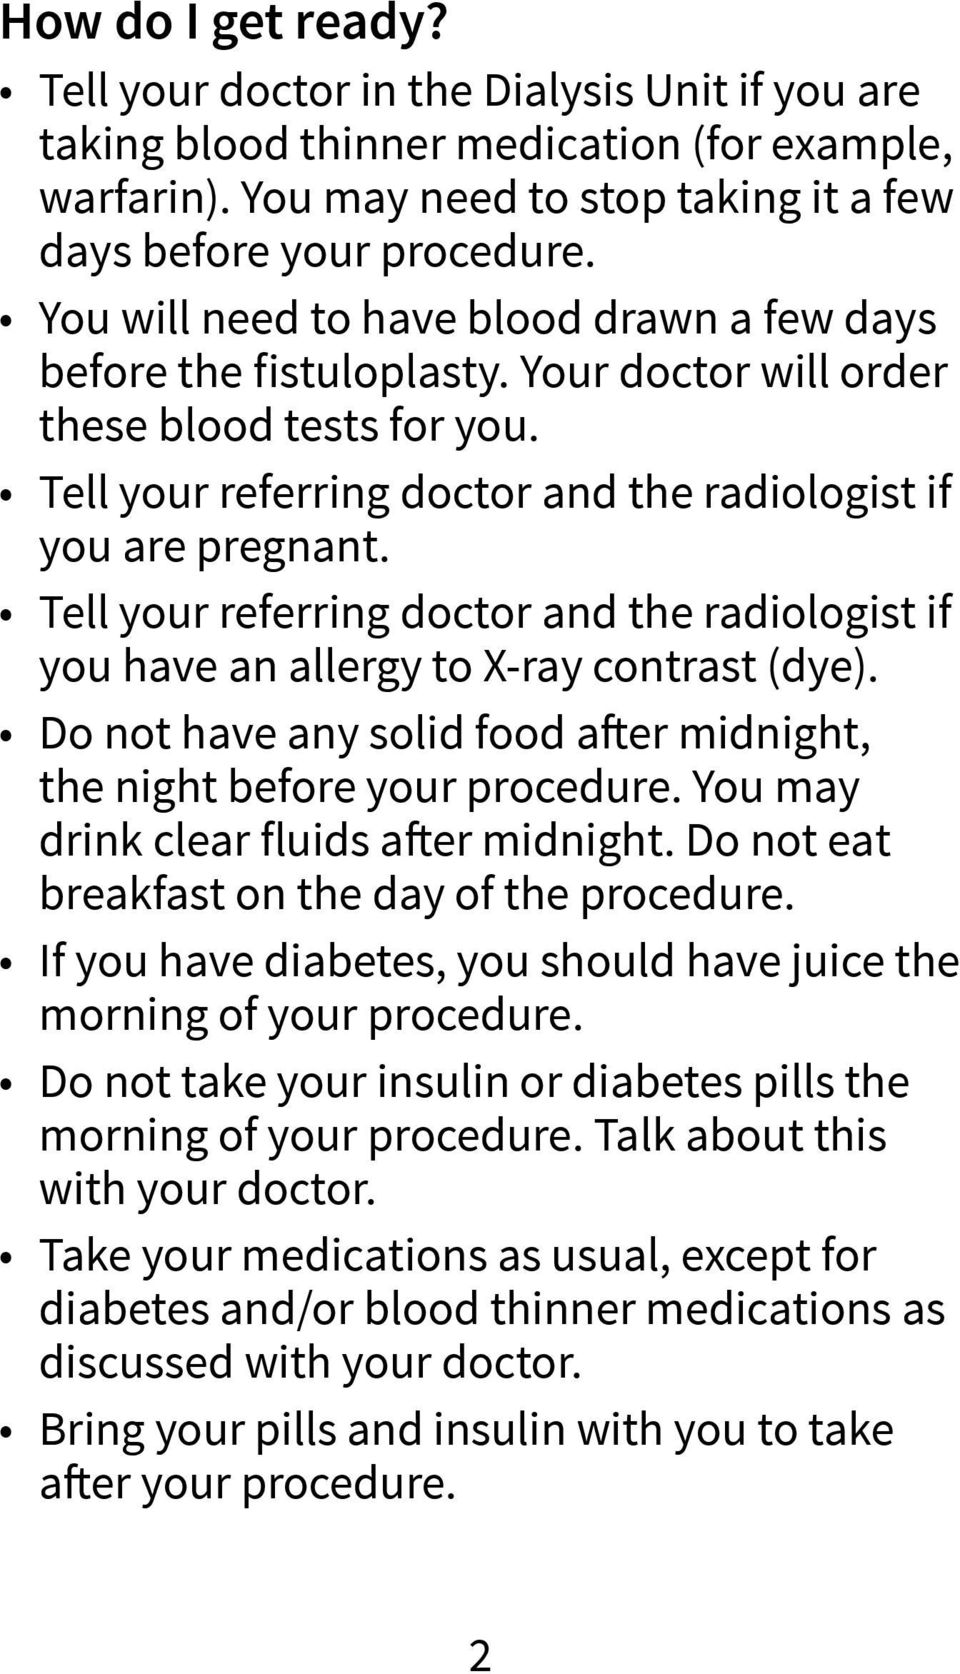 Tell your referring doctor and the radiologist if you have an allergy to X-ray contrast (dye). Do not have any solid food after midnight, the night before your procedure.